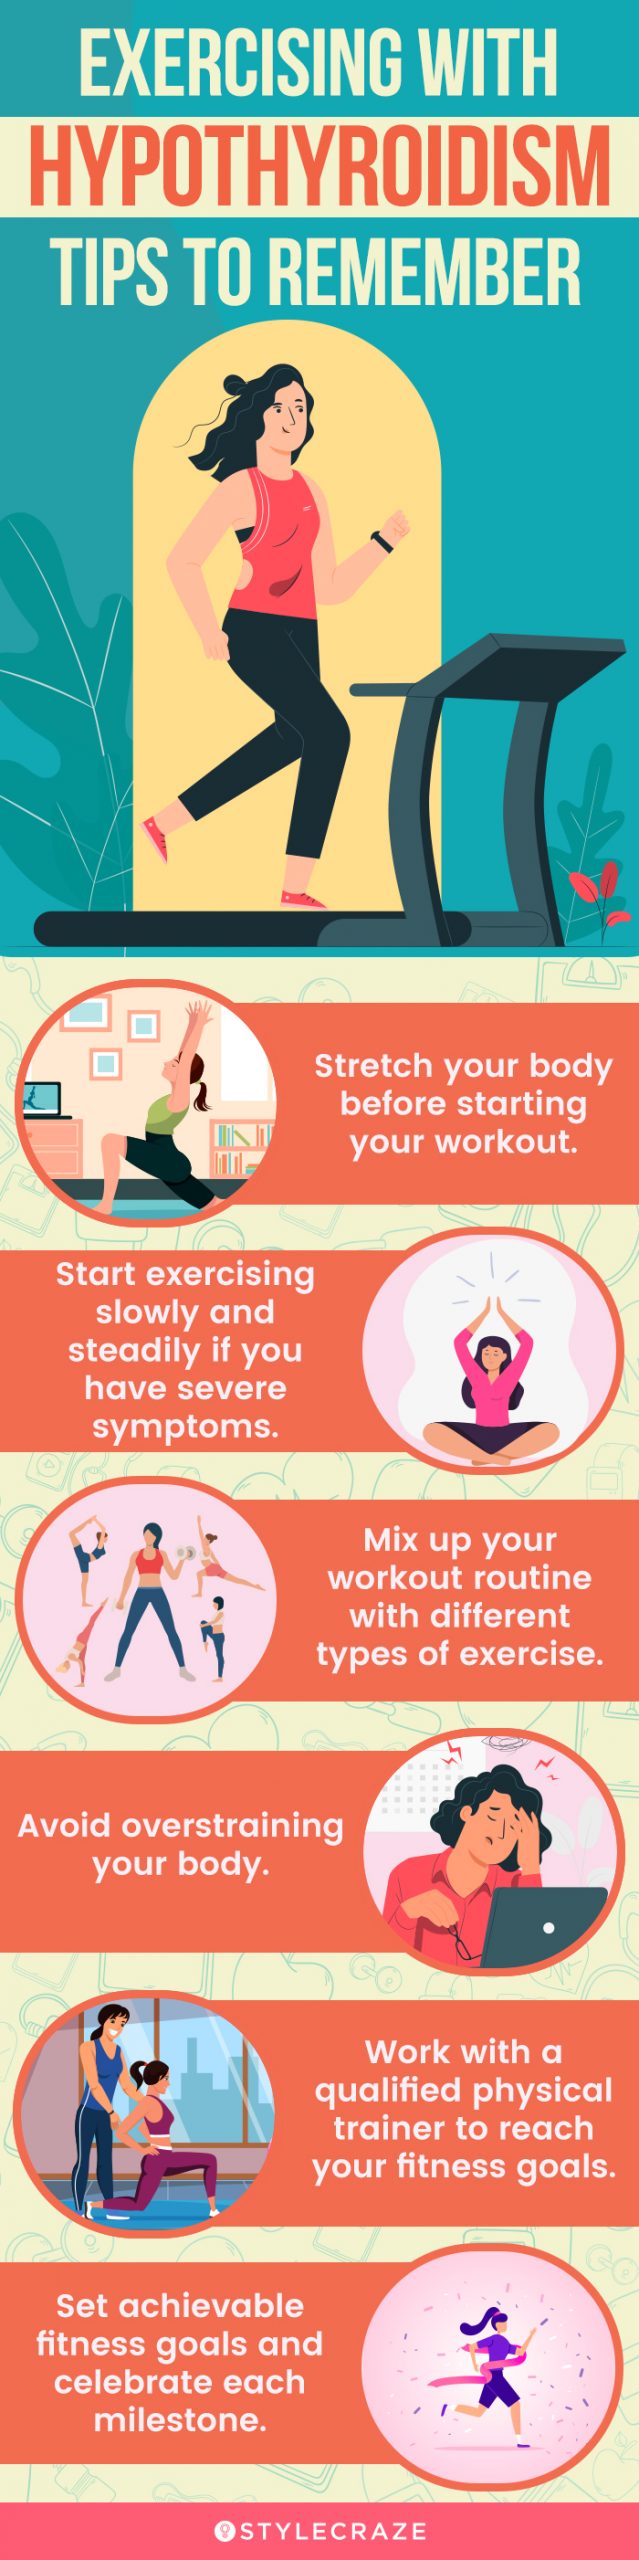 exercising with hypothyroidism tips to remember (infographic)